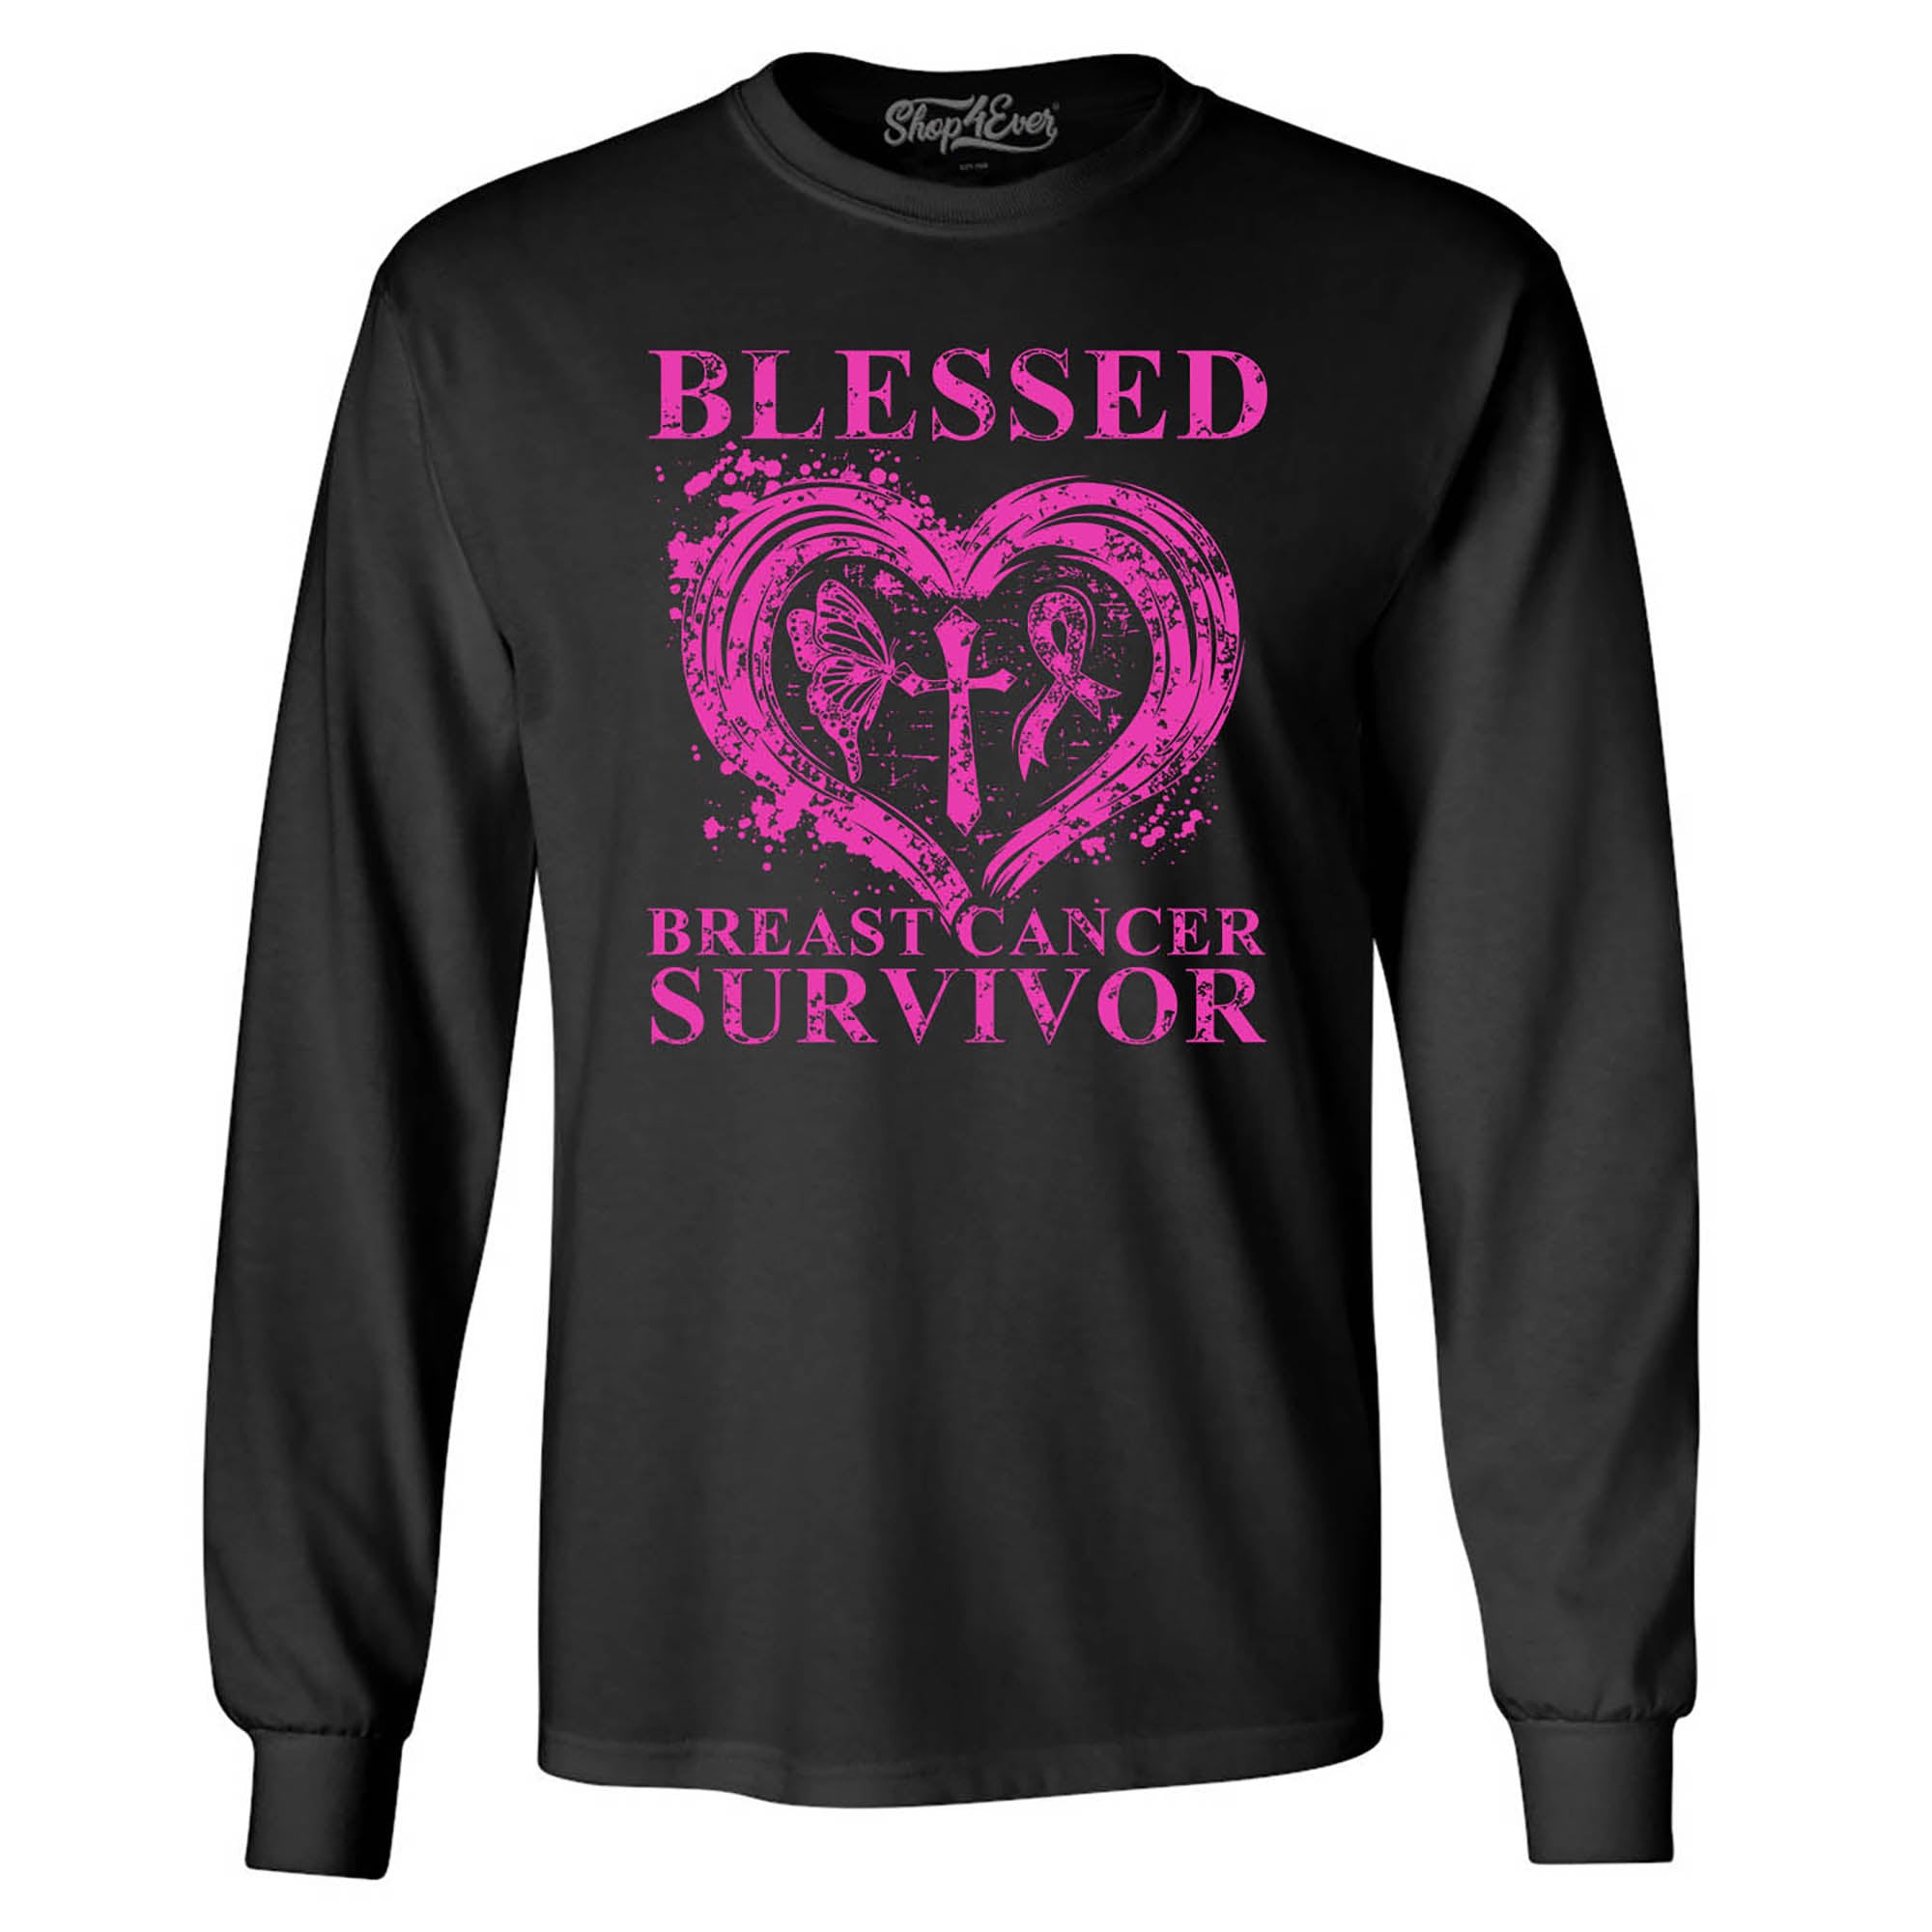 Blessed Breast Cancer Awareness Long Sleeve Shirt